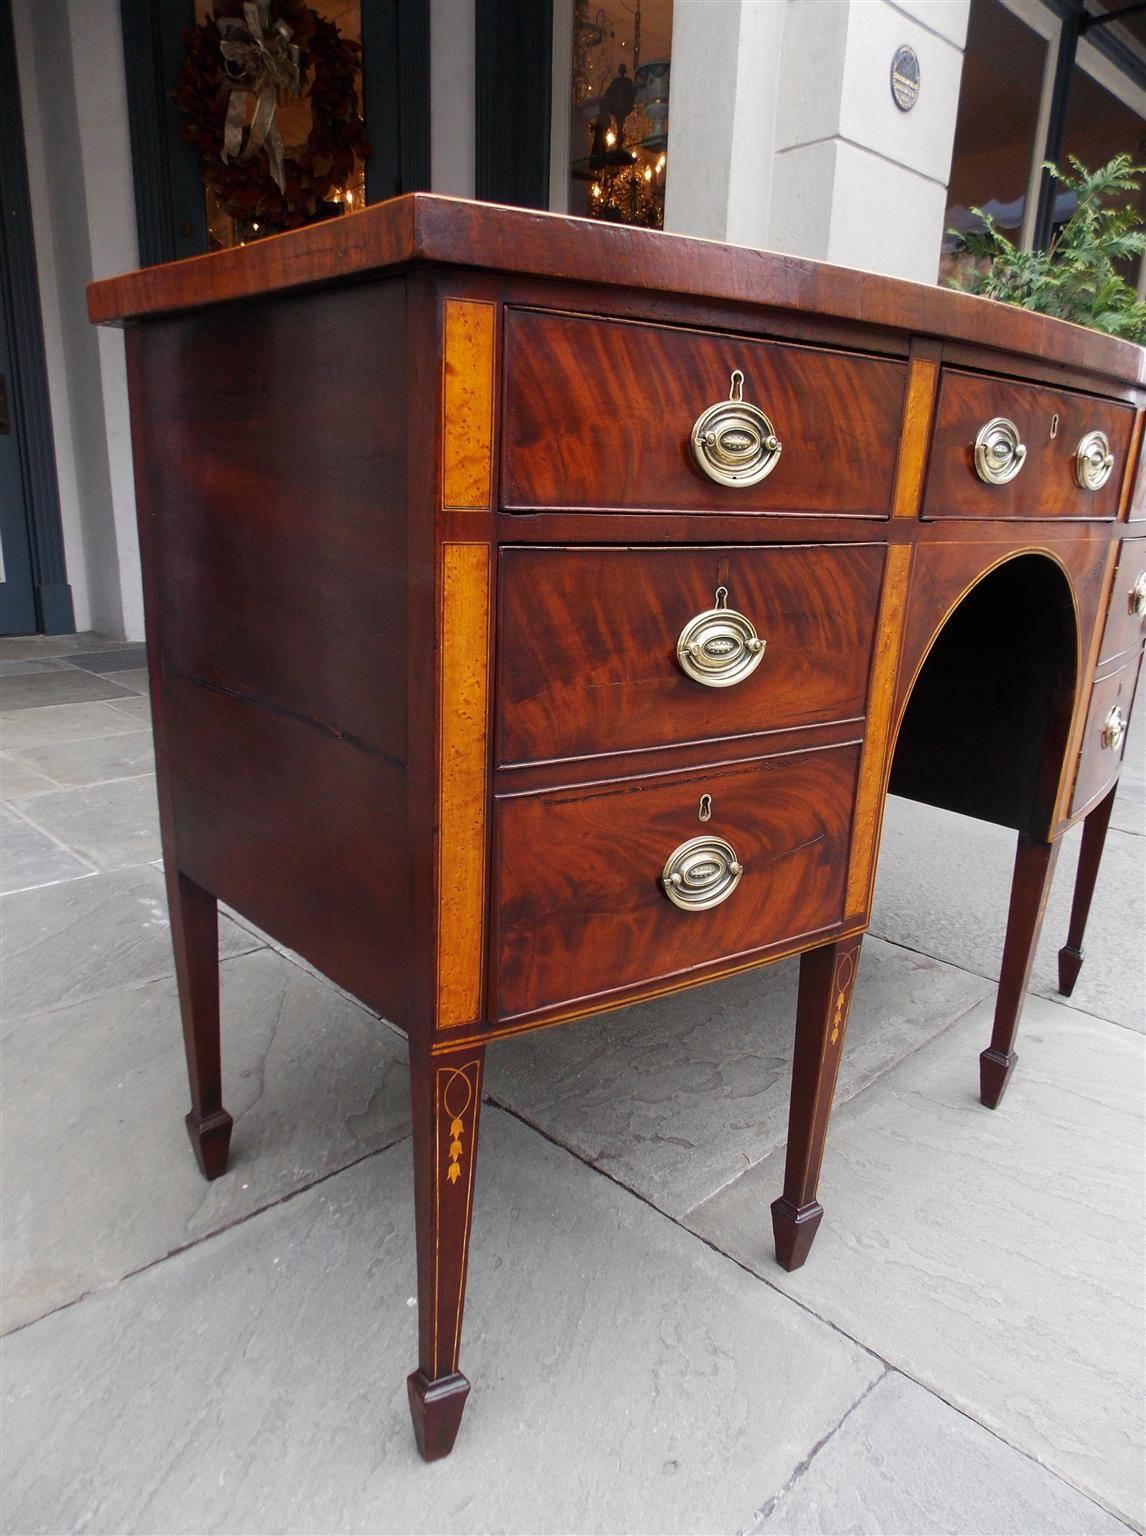 Cast English Hepplewhite Mahogany Bow Front Inlaid Sideboard, Circa 1780 For Sale